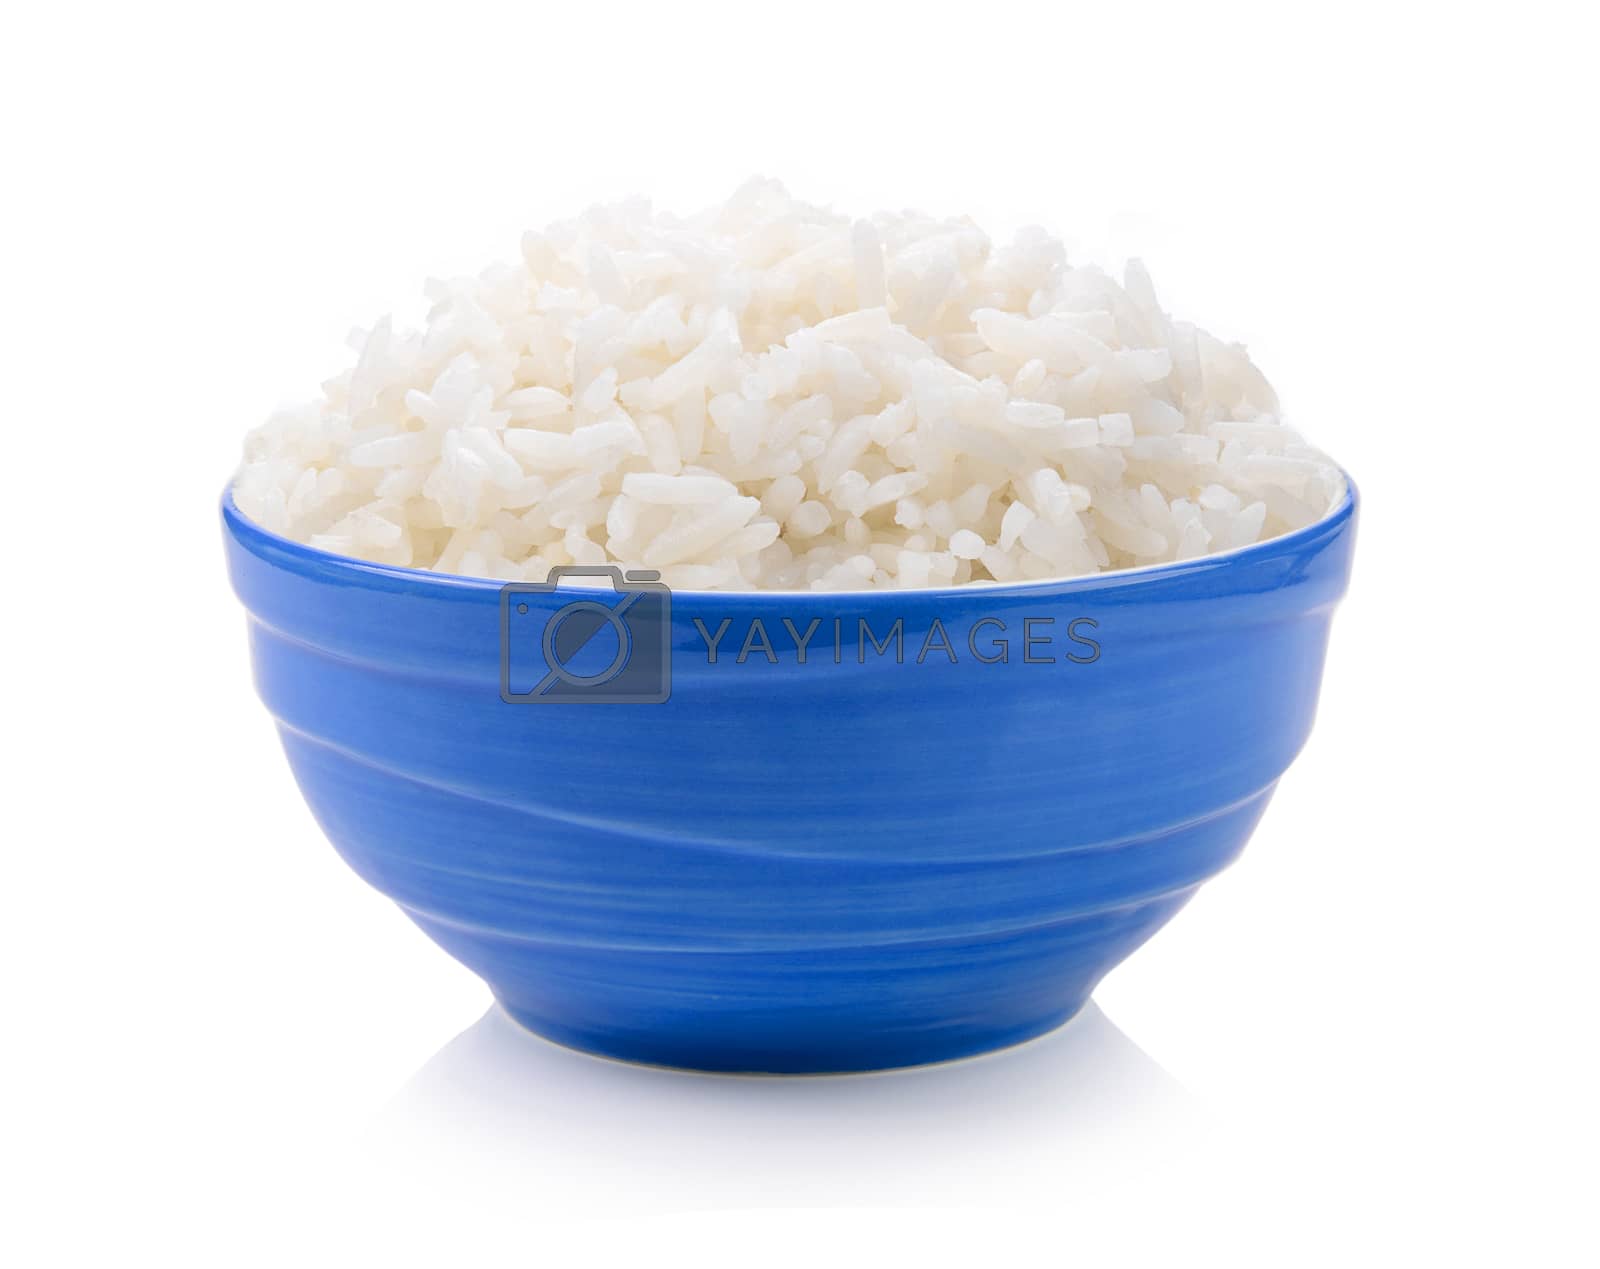 Royalty free image of rice in blue bowl on white background by sommai